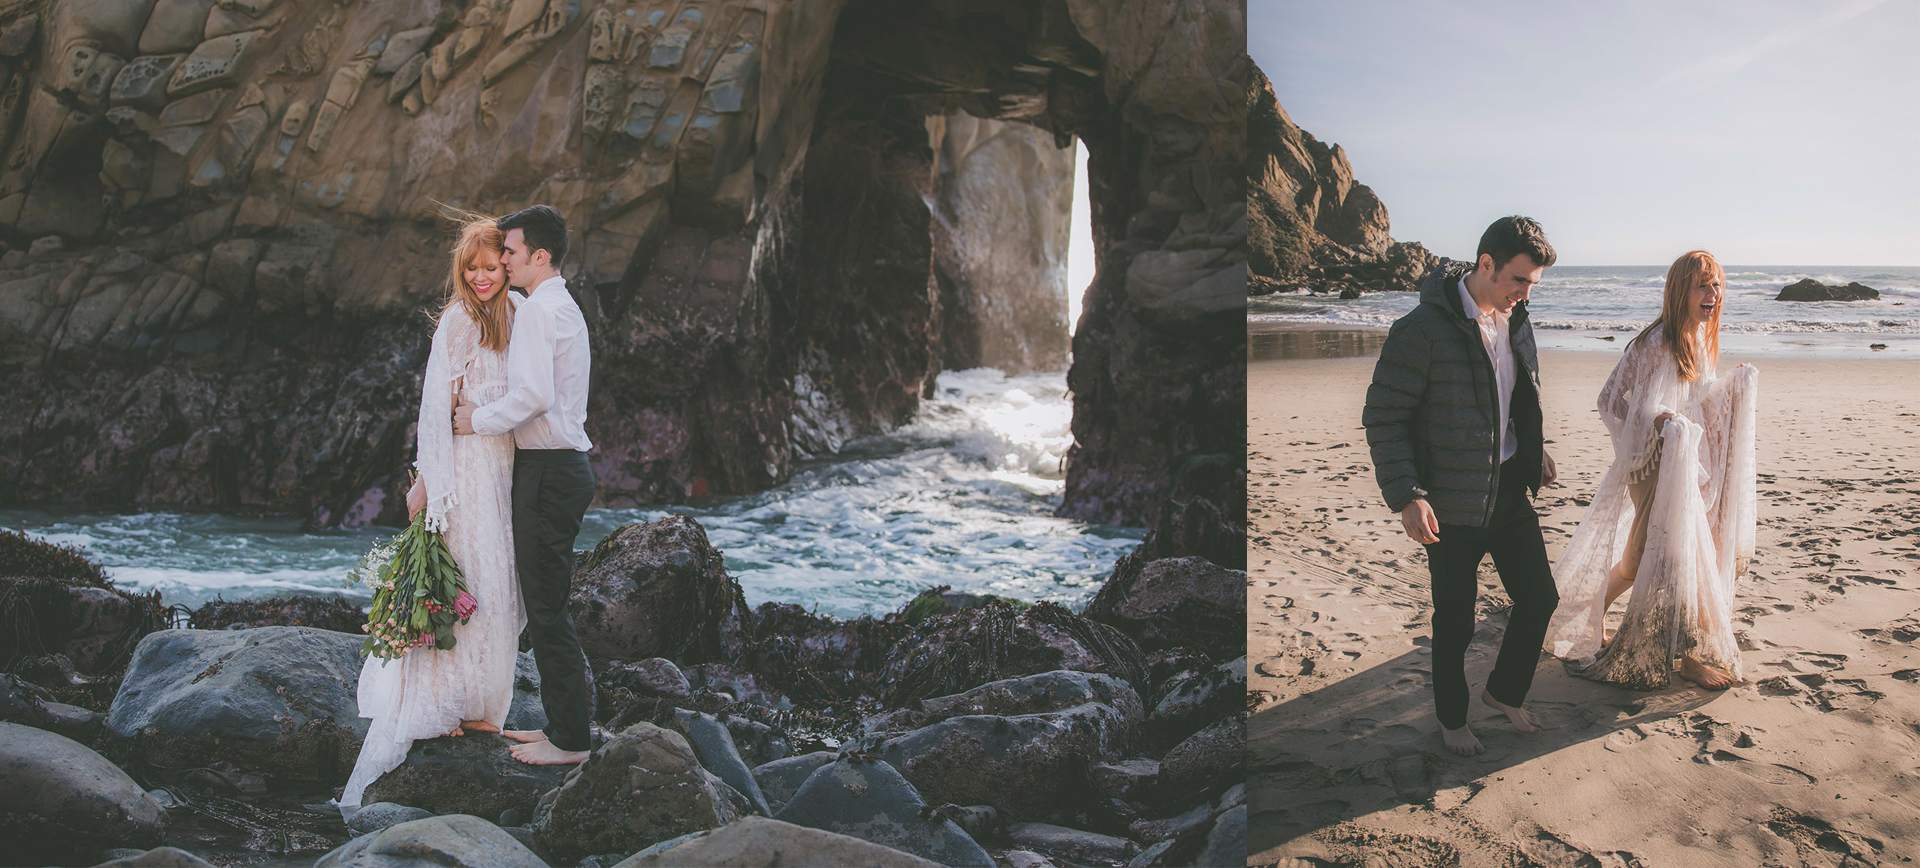 Big Sur Elopement package in California -bride and groom during their wedding photos at the beach